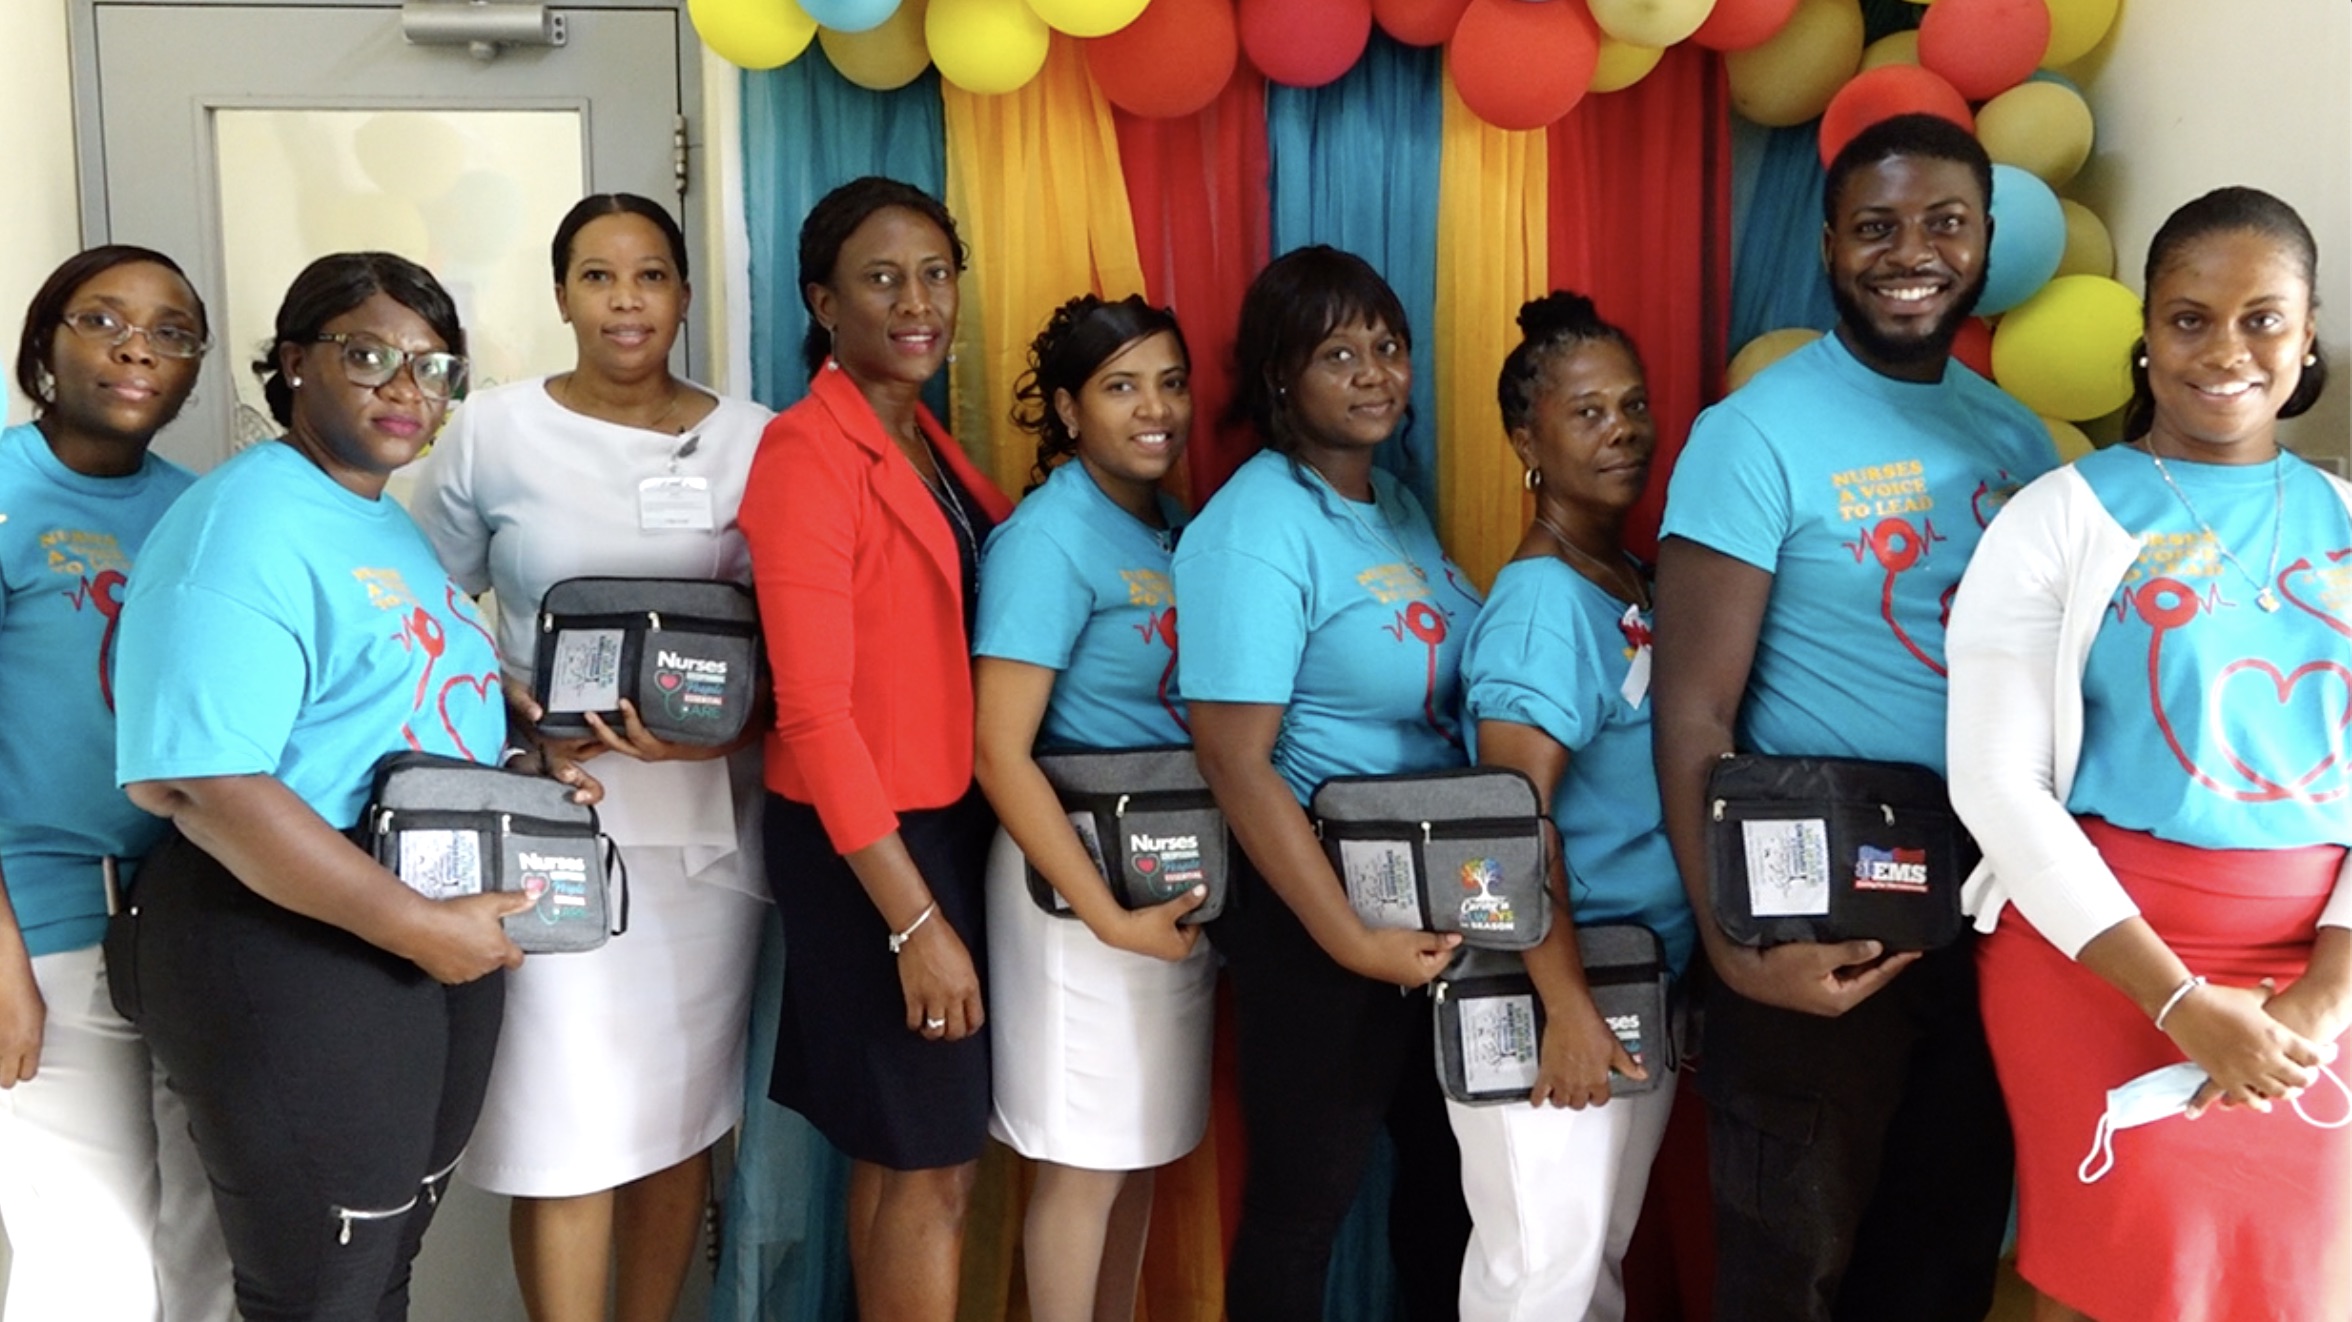 (L-r) Assistant Matron Gracelyn Hanley; Mrs. Simone Harris, President of the Nevis Nurses Association; Assistant Matron Dhaima Golding; Ms. Shelisa Martin-Clarke, Permanent Secretary in the Ministry of Health; Matron Chandreka Persaud-Wallace; Ms. Colleen Hanley, nursing attendant; Ms. Donna Hanley, Nurse Manager at the Flamboyant Nursing Home; Mr. Roan Bramwell, emergency medical technician; and Ms. Latoya Jeffers, Assistant Secretary in the Ministry of Health share a light moment at the Alexandra Hospital on International Nurses Day, May 12, 2021